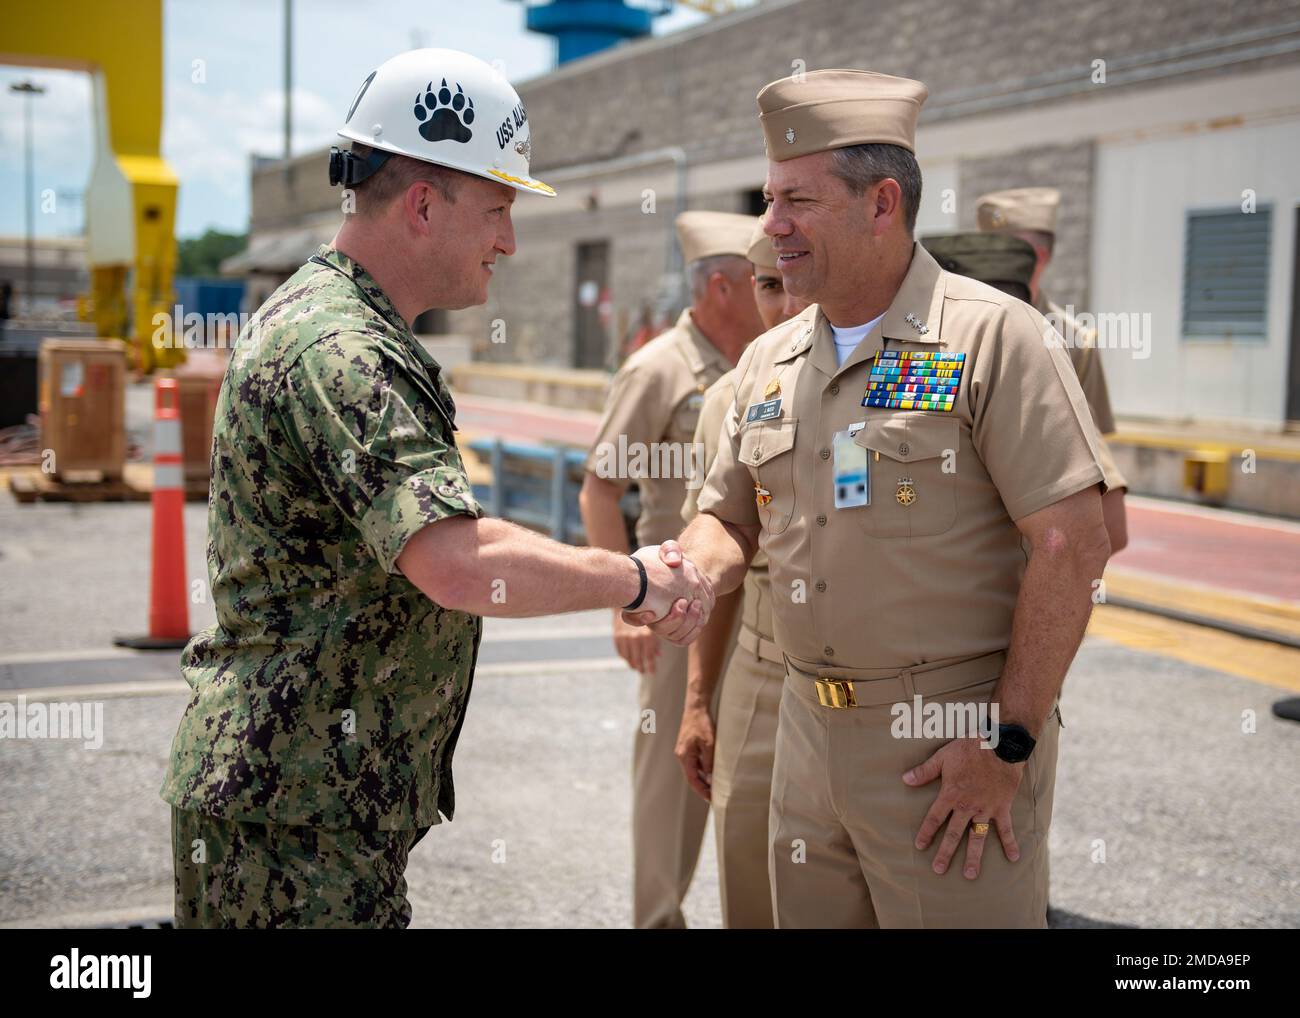 KINGS BAY, Ga. (July 14, 2022) Cmdr. John Smith, commanding officer of the Ohio-class ballistic-missile submarine USS Alaska (SSBN 732) Blue Crew greets Vice Adm. Juan Ricardo Rozo, Commander, Caribbean Naval Force, before a tour aboard the ship. The visit is part of the Diesel Electric Submarine Initiative (DESI) between the United States and partner nations. DESI is a program designed to train crews and test capabilities in Anti-Submarine Warfare between nuclear-powered and diesel-electric submarines. Stock Photo